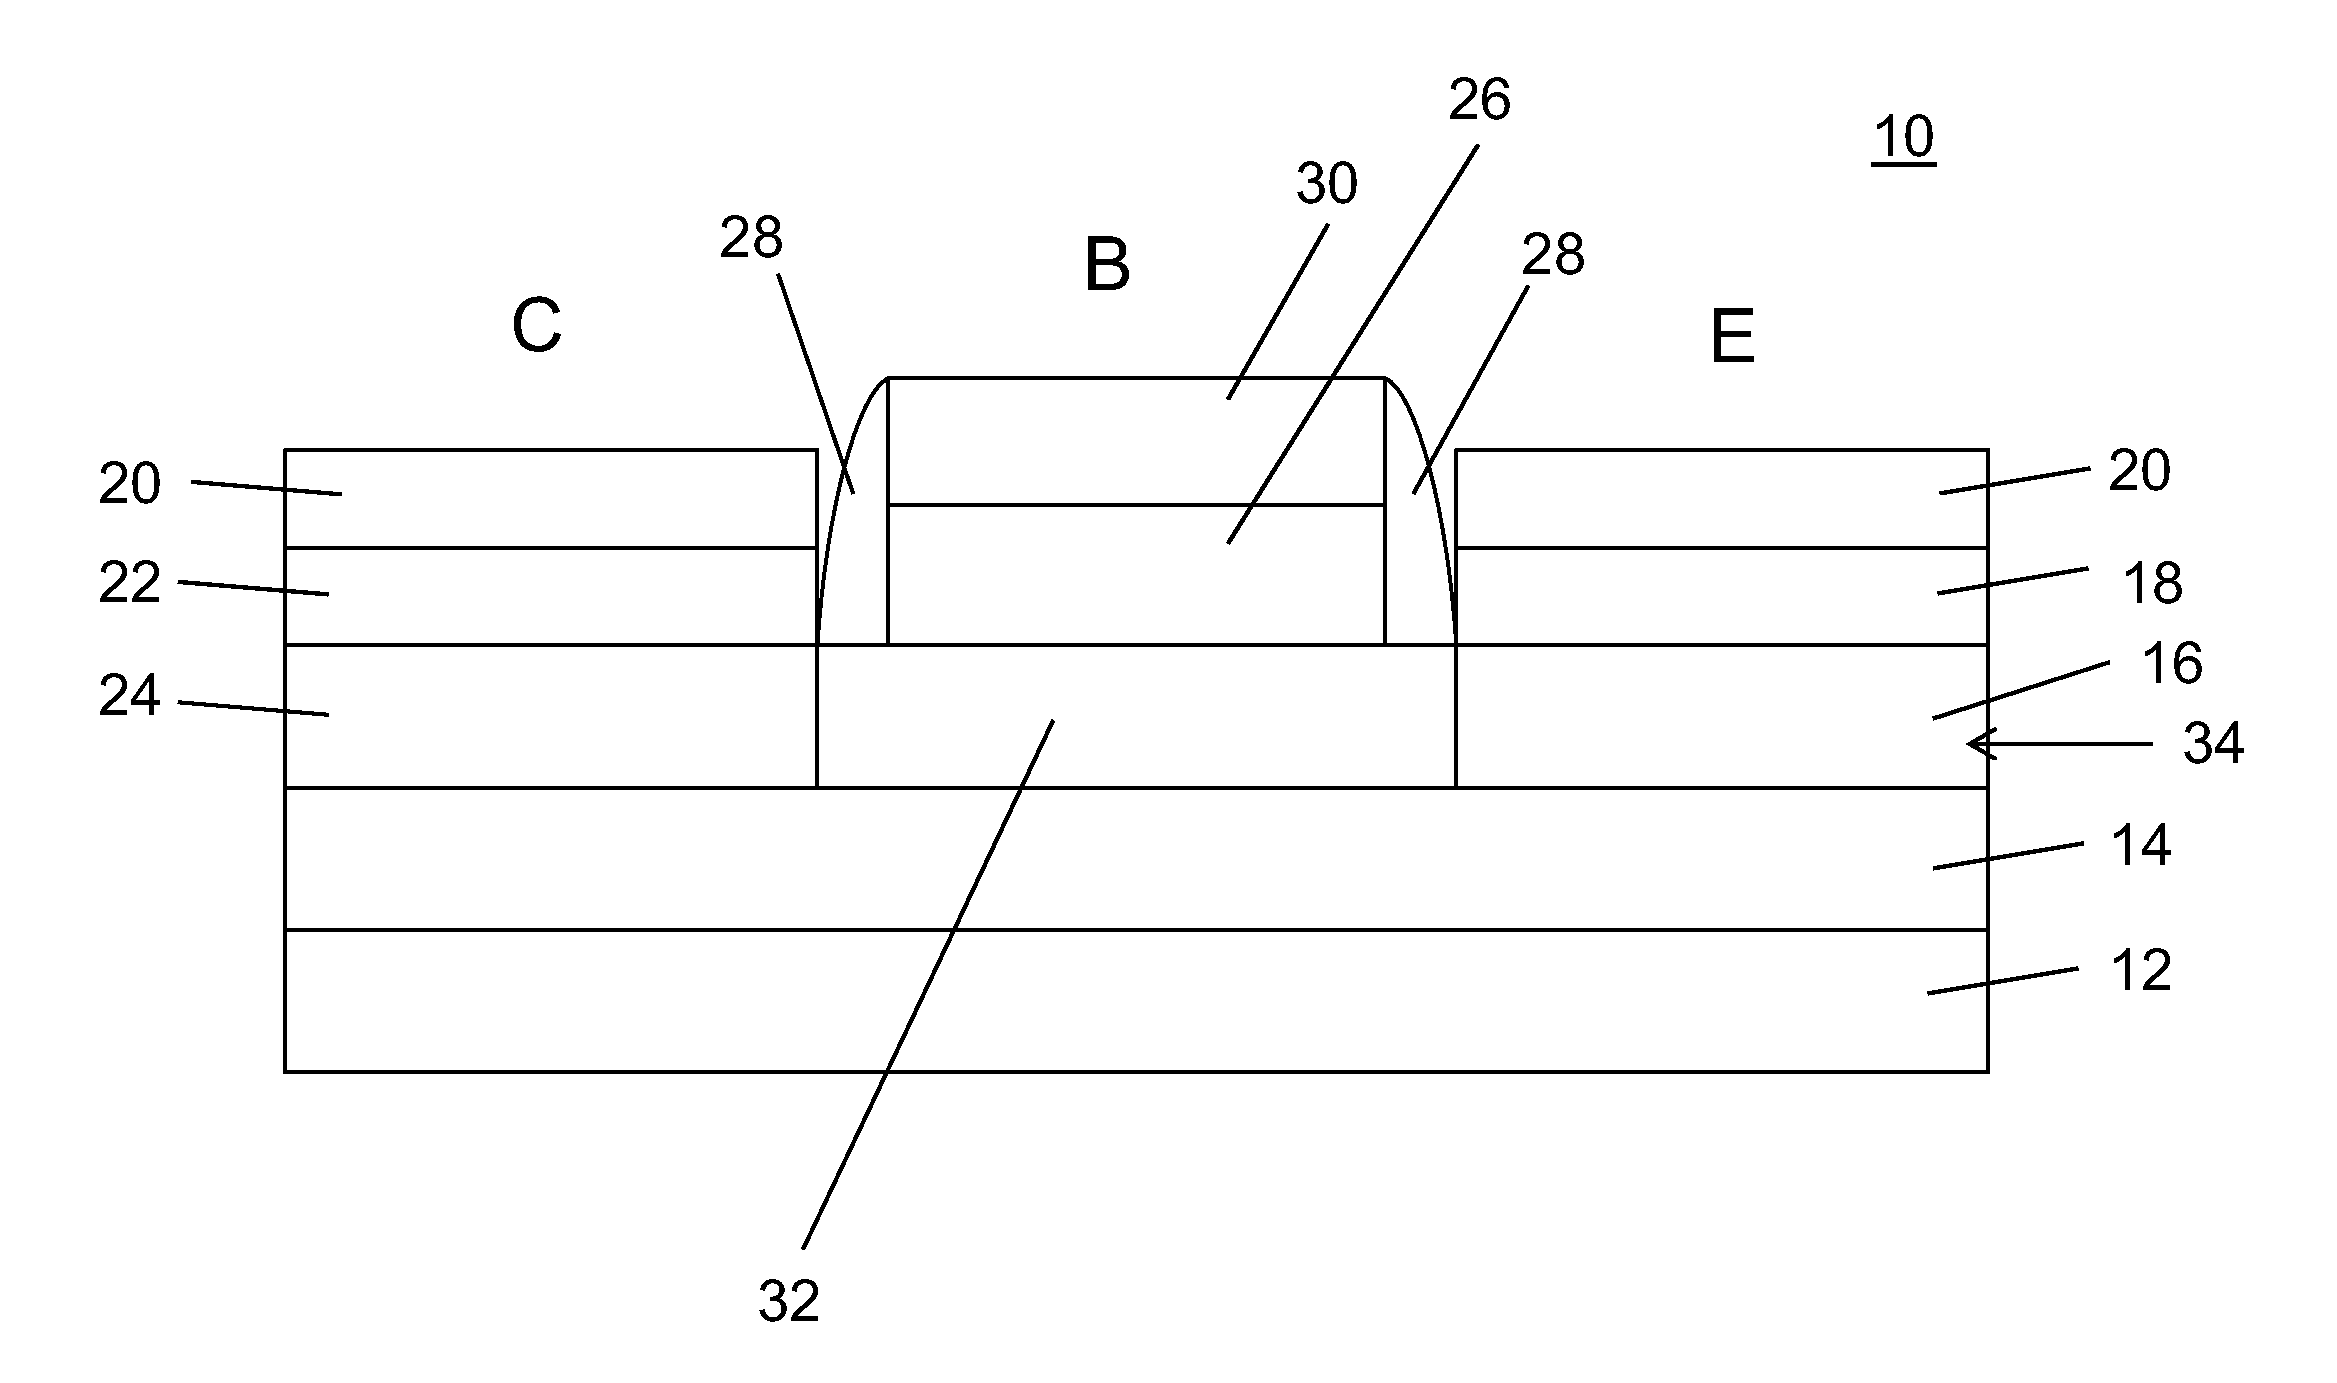 Bipolar transistor with carbon alloyed contacts